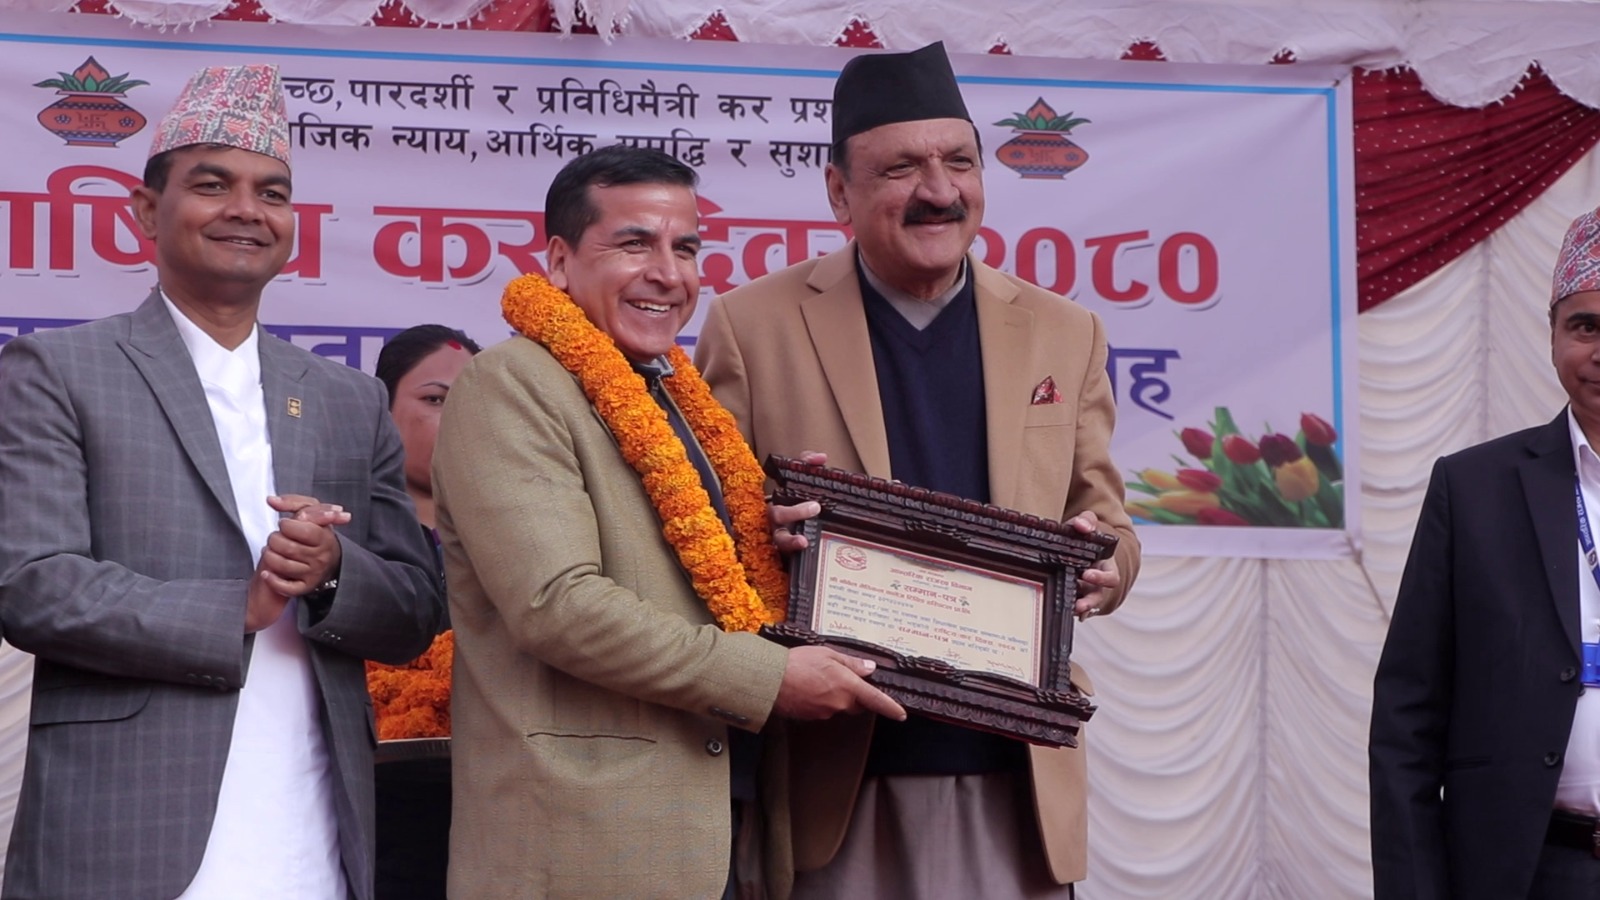 MP Sharma’s ‘Nobel Medical College’ honored for paying the highest tax